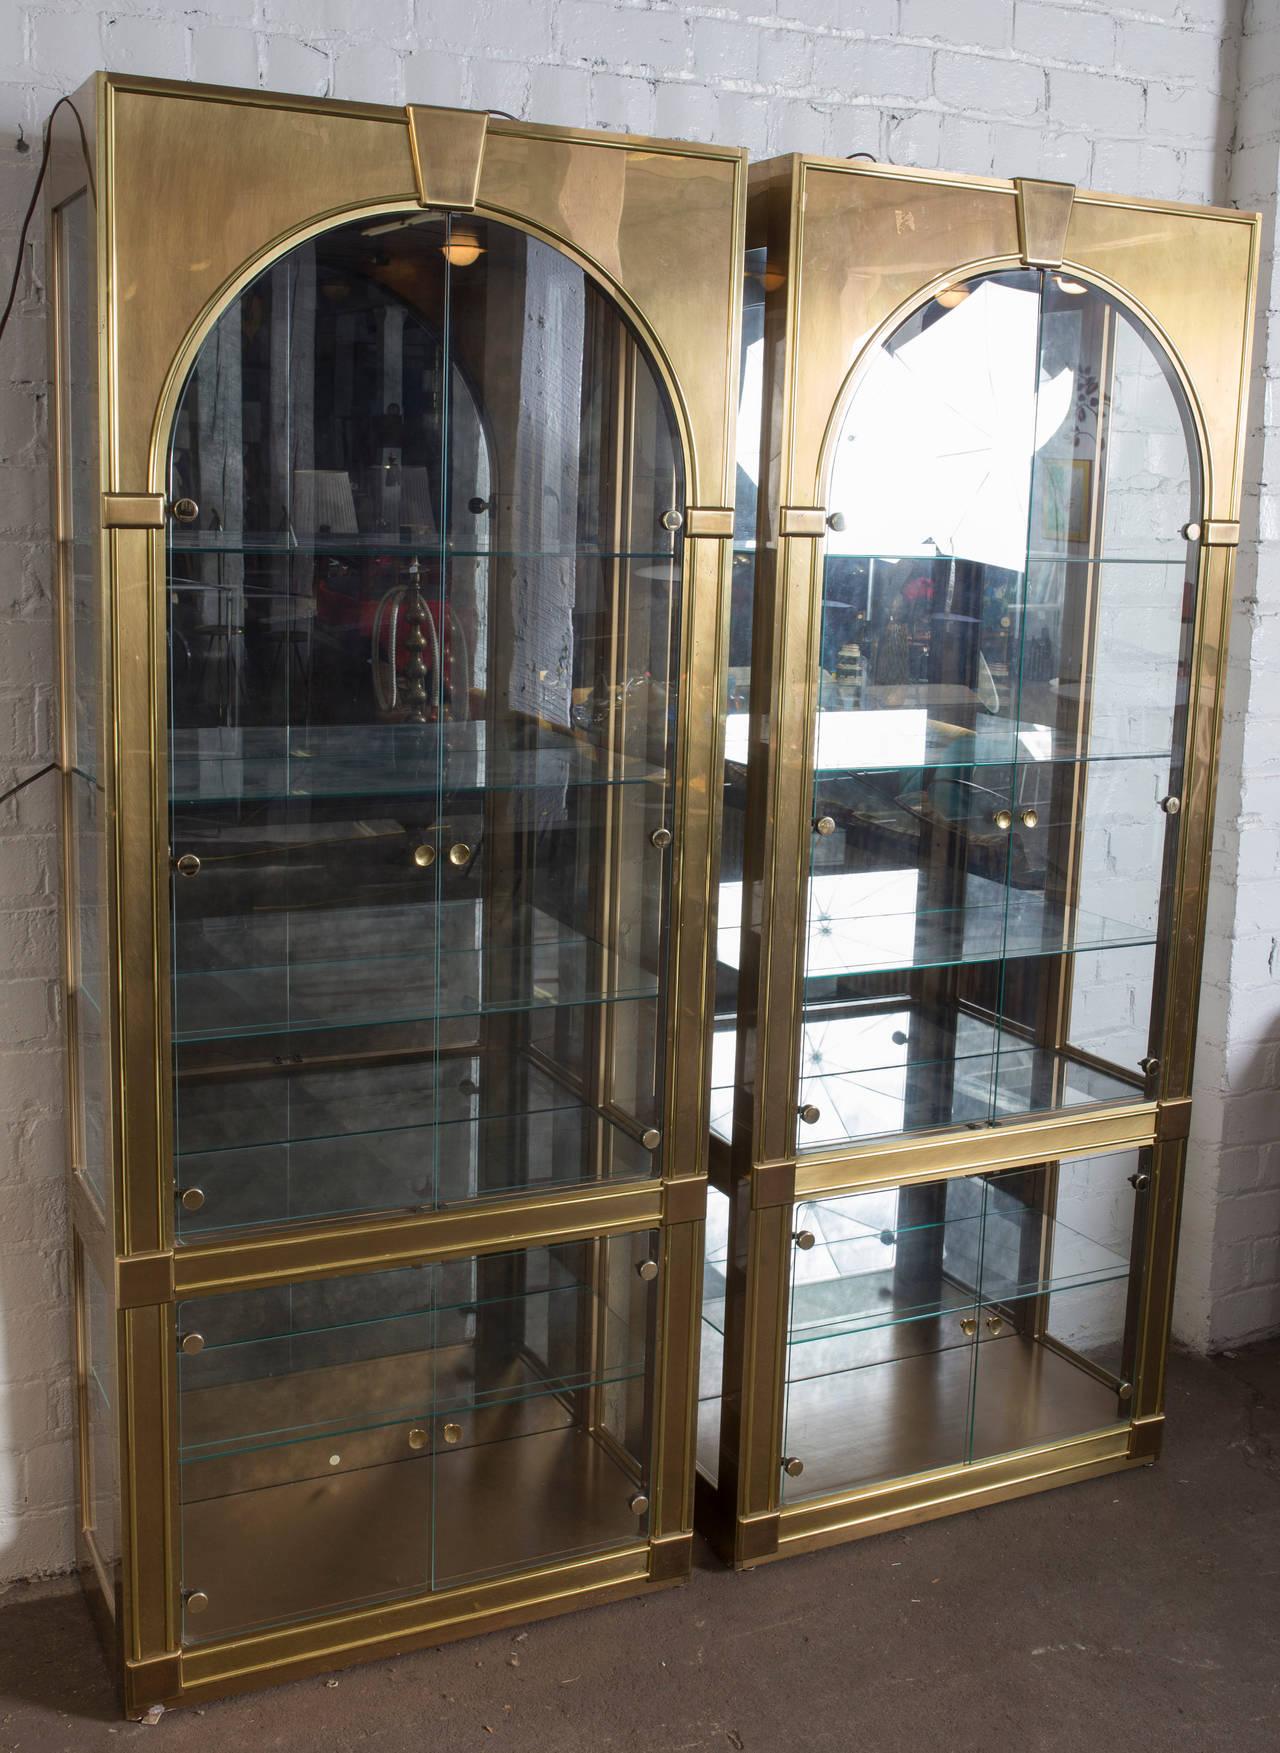 A pair of impressive vitrines in the classical Palladian style, manufactured by Mastercraft, circa 1970s. Each with two-door arched fronts, antiqued smoked mirrors backs, clear glass against brass frames. The interior with three glass shelves above